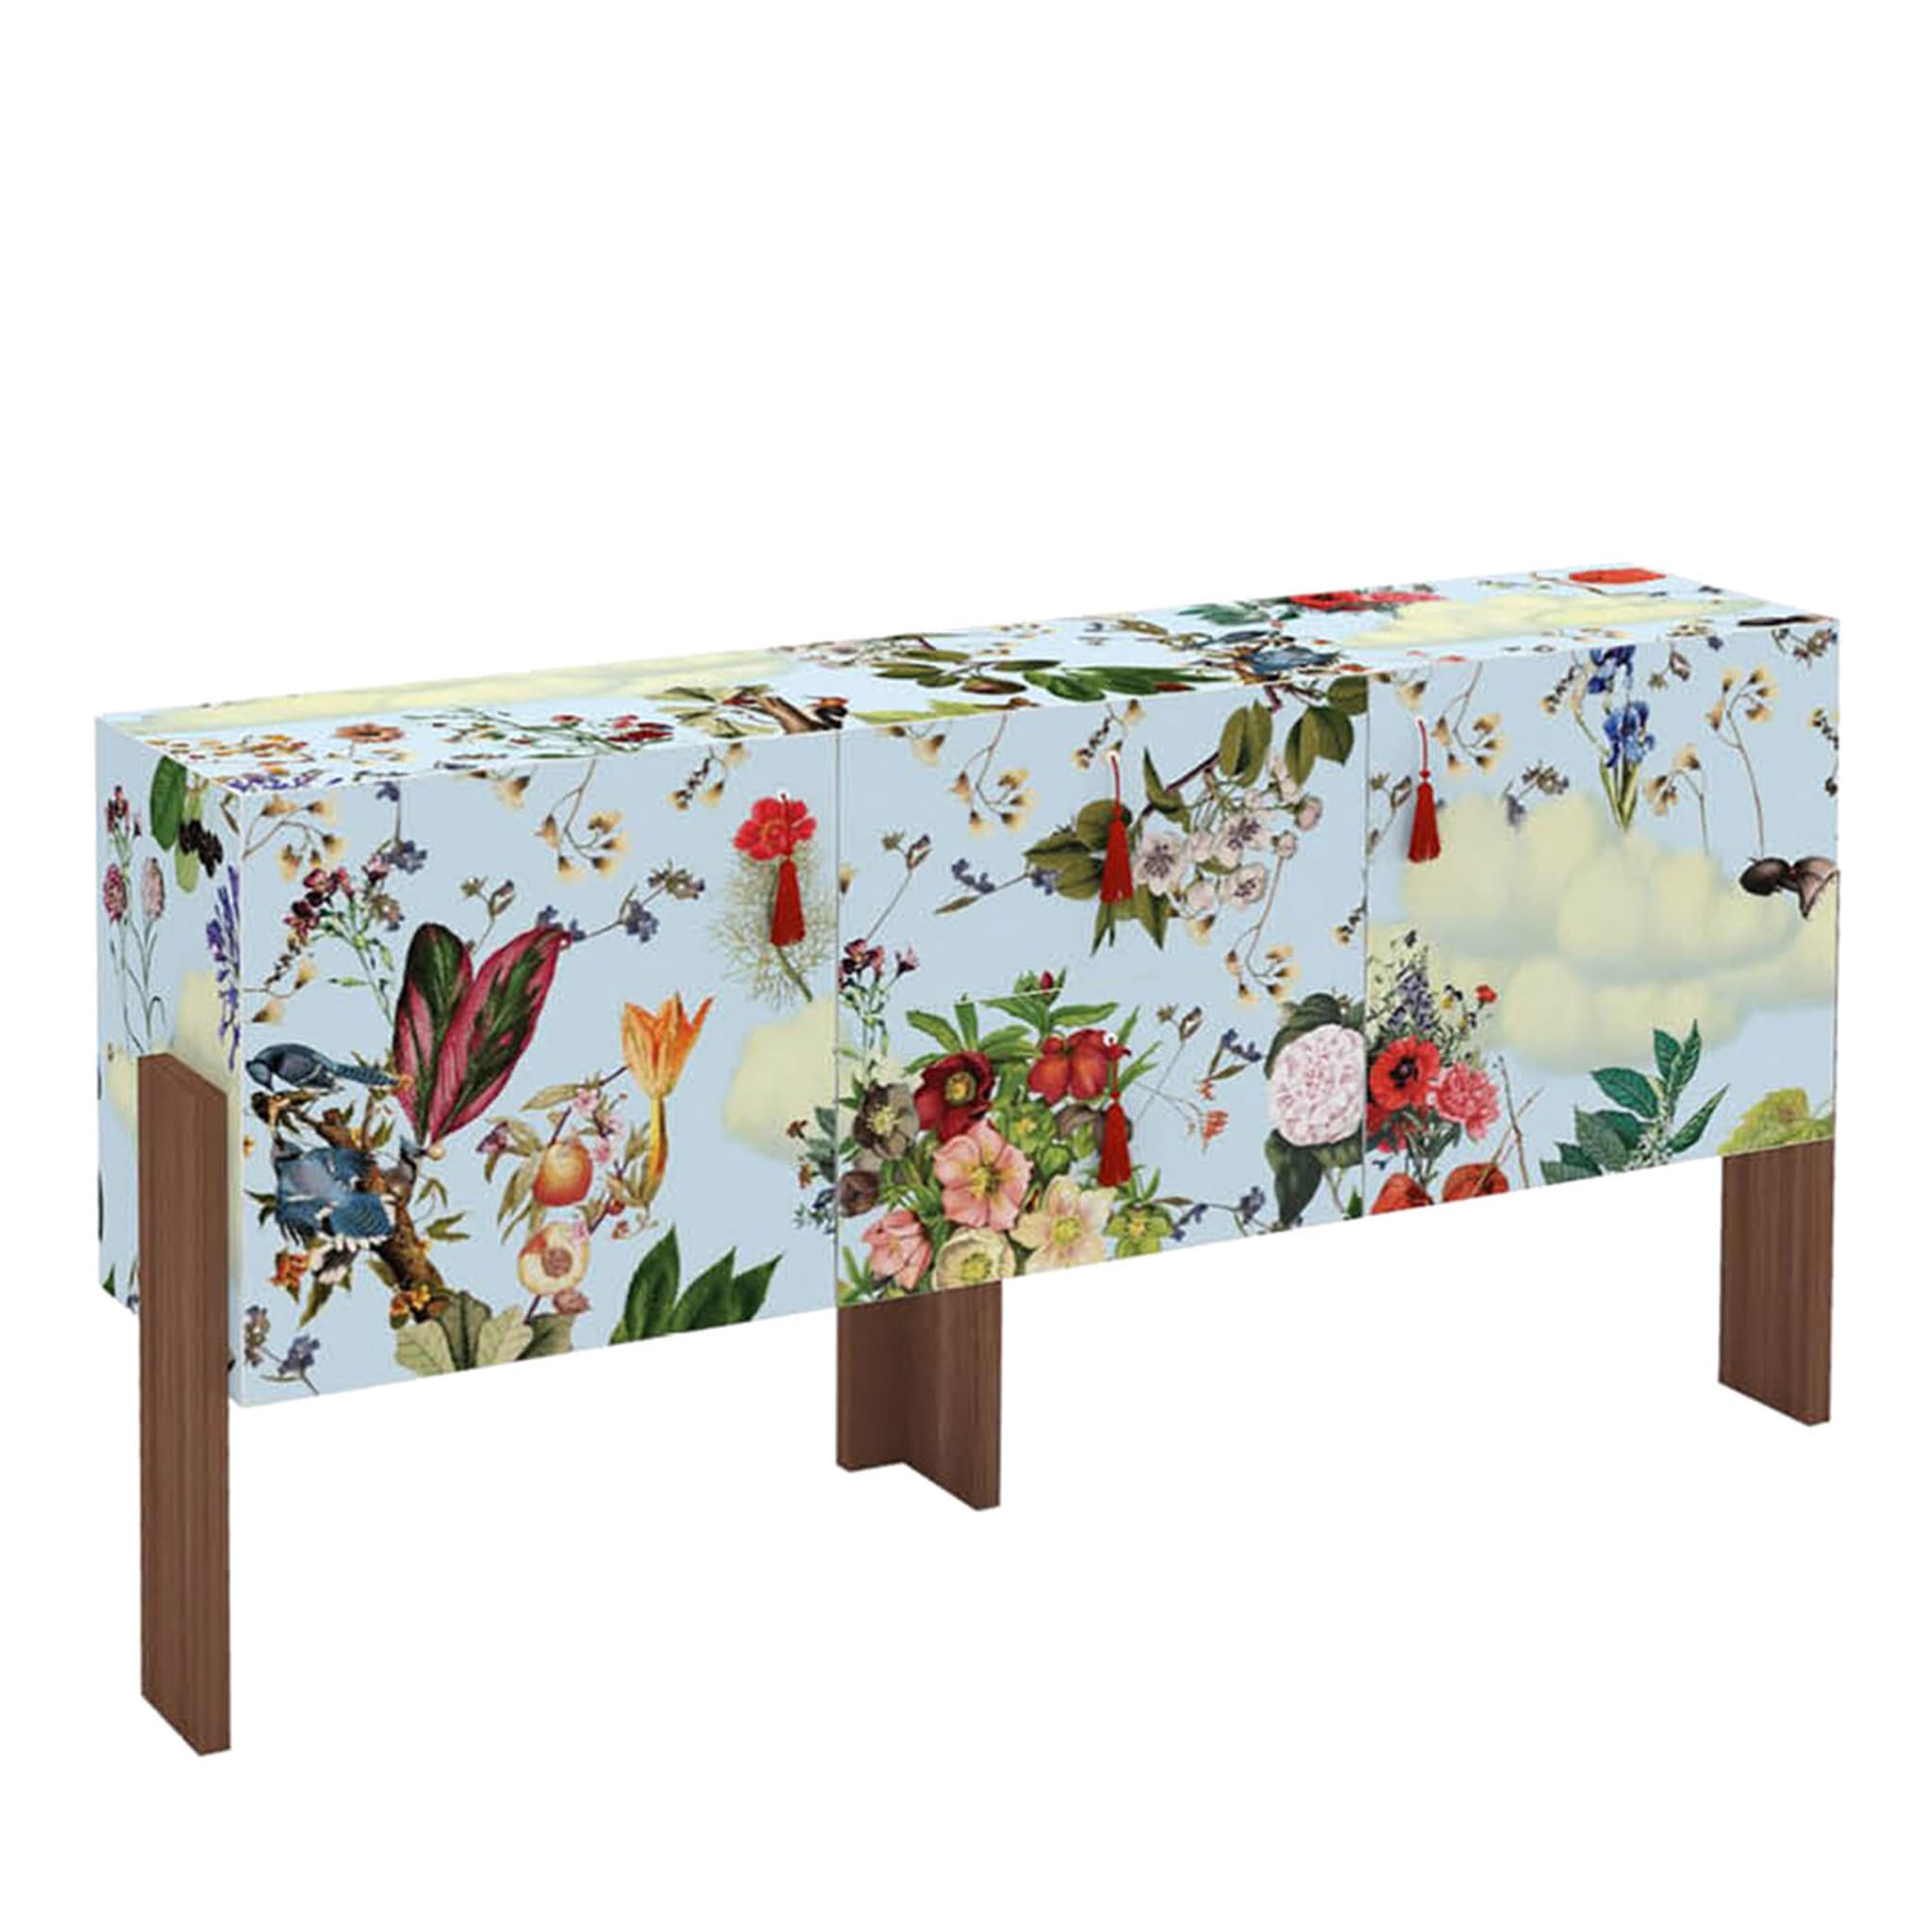 Ziqqurat Floral Polychrome Sideboard by Driade Lab #1 - Main view